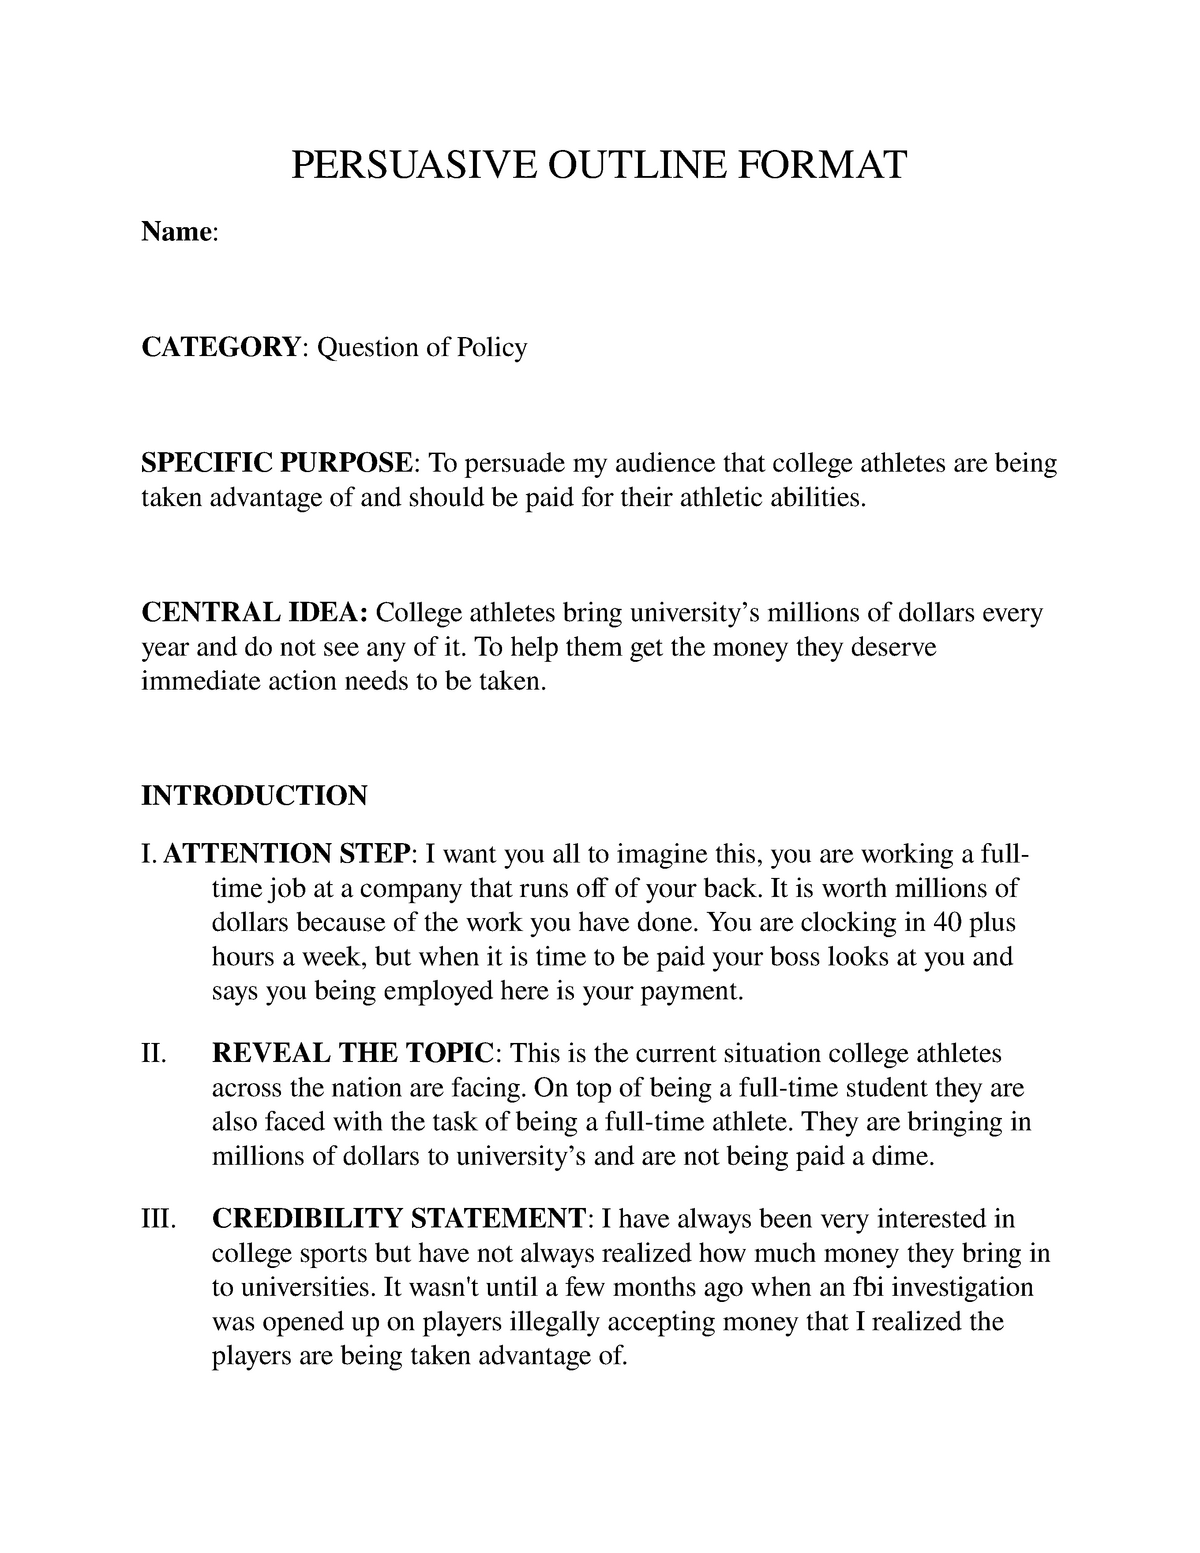 persuasive essay on college athletes being paid